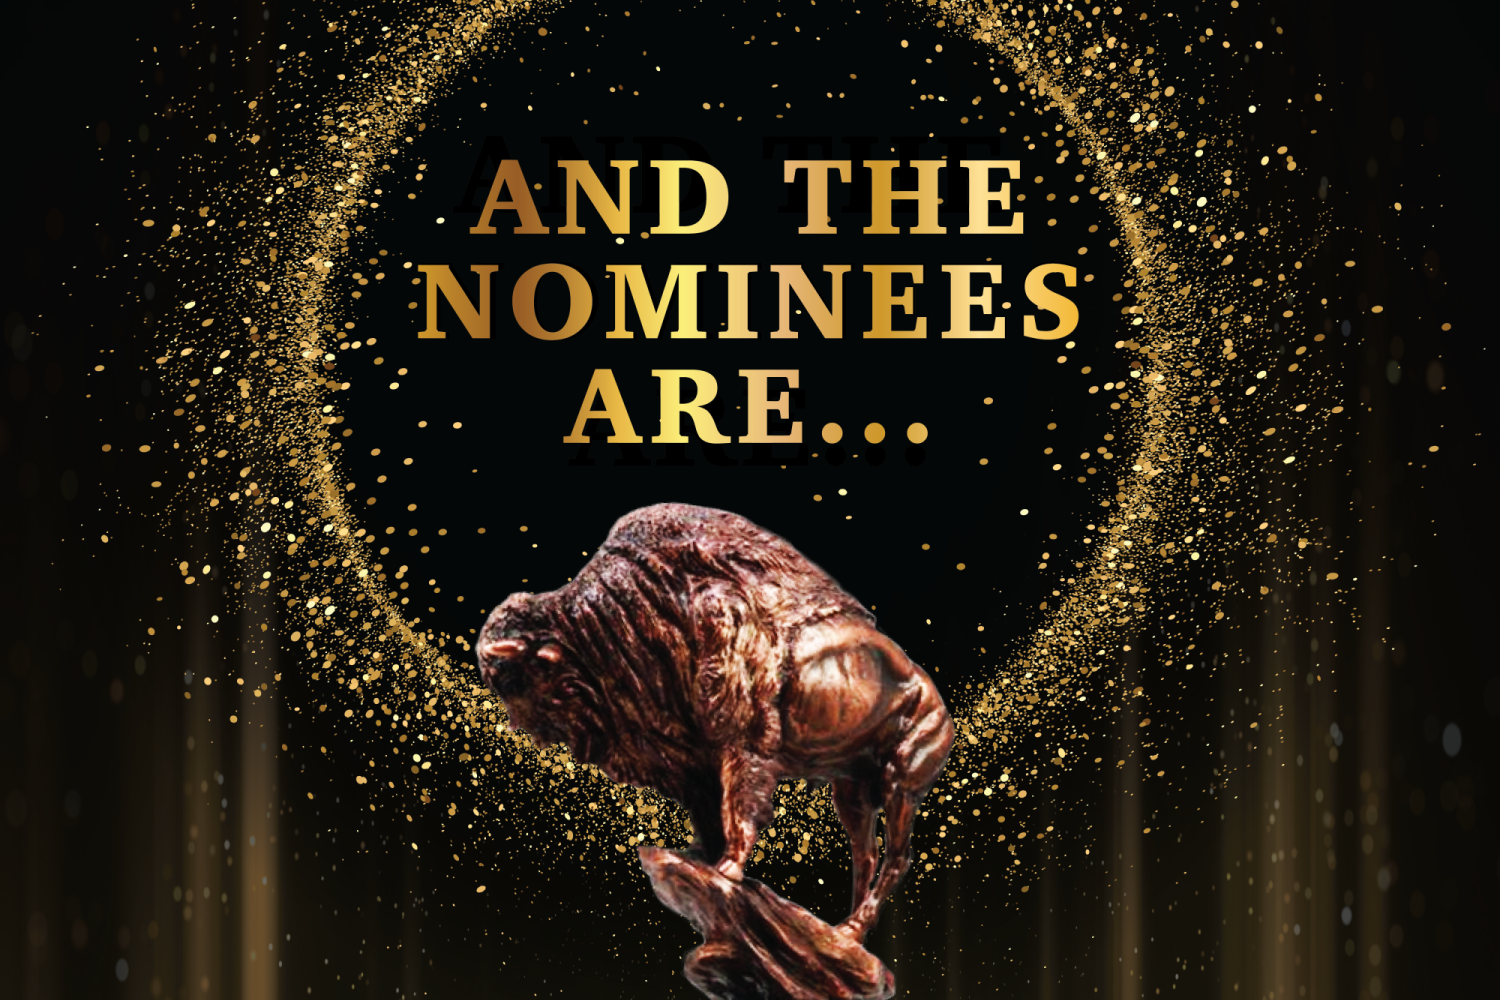 Virgils, and the Nominees are